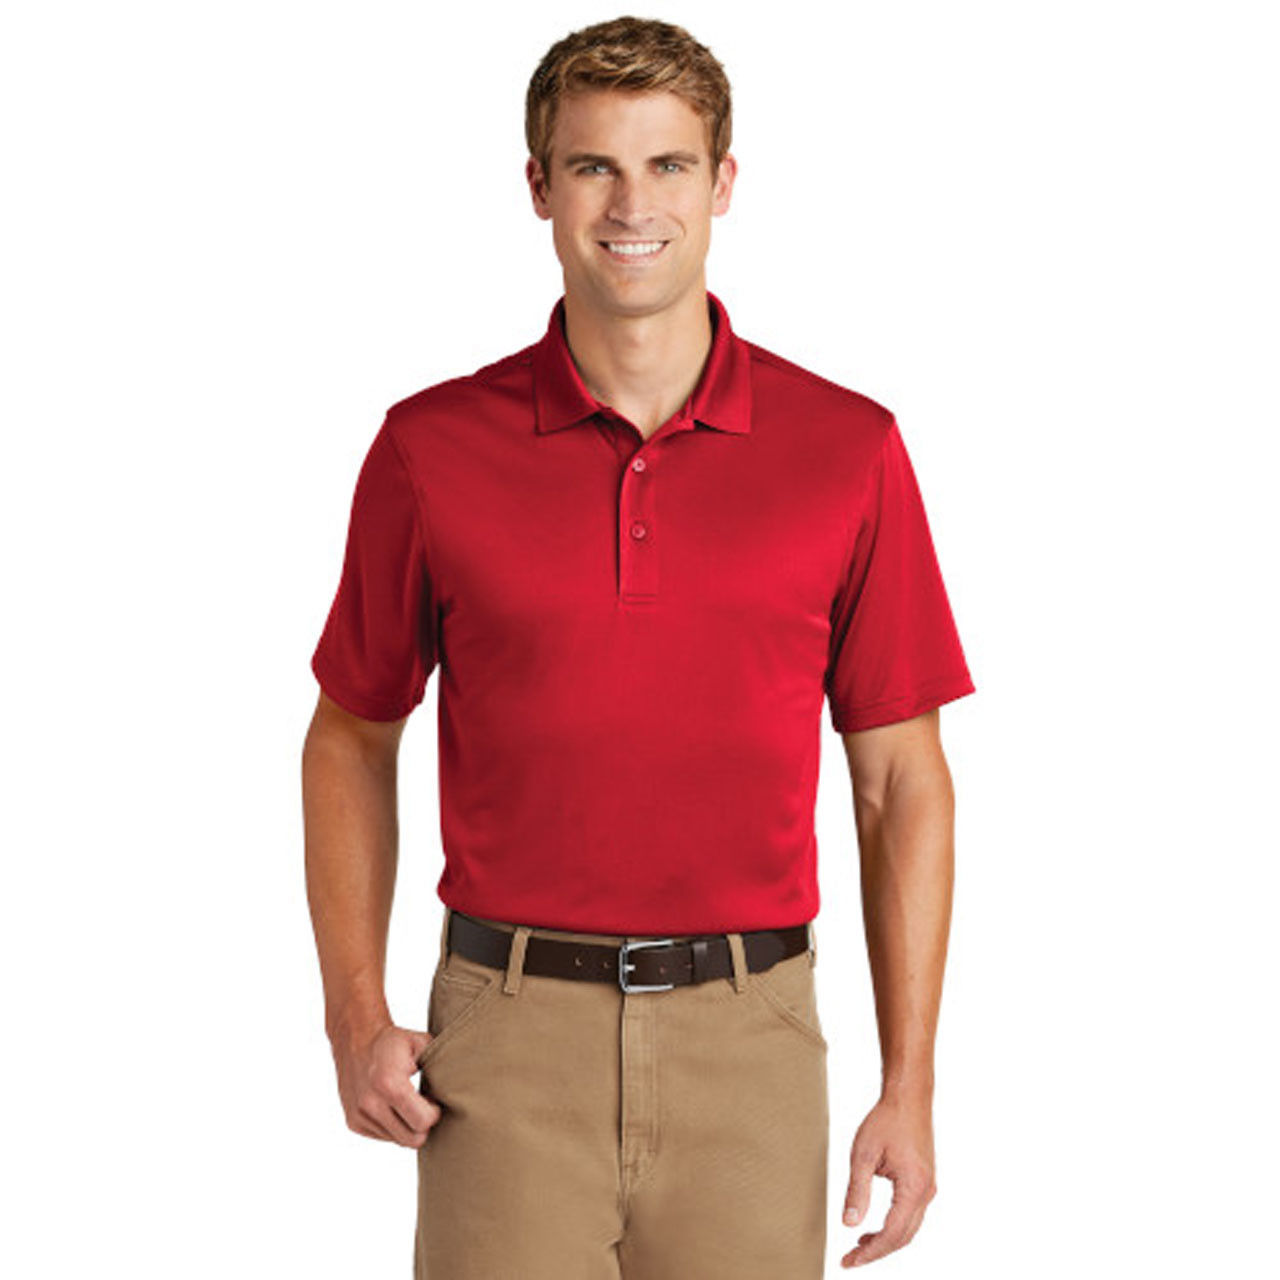 Does the men's red collared shirt come with any vents?